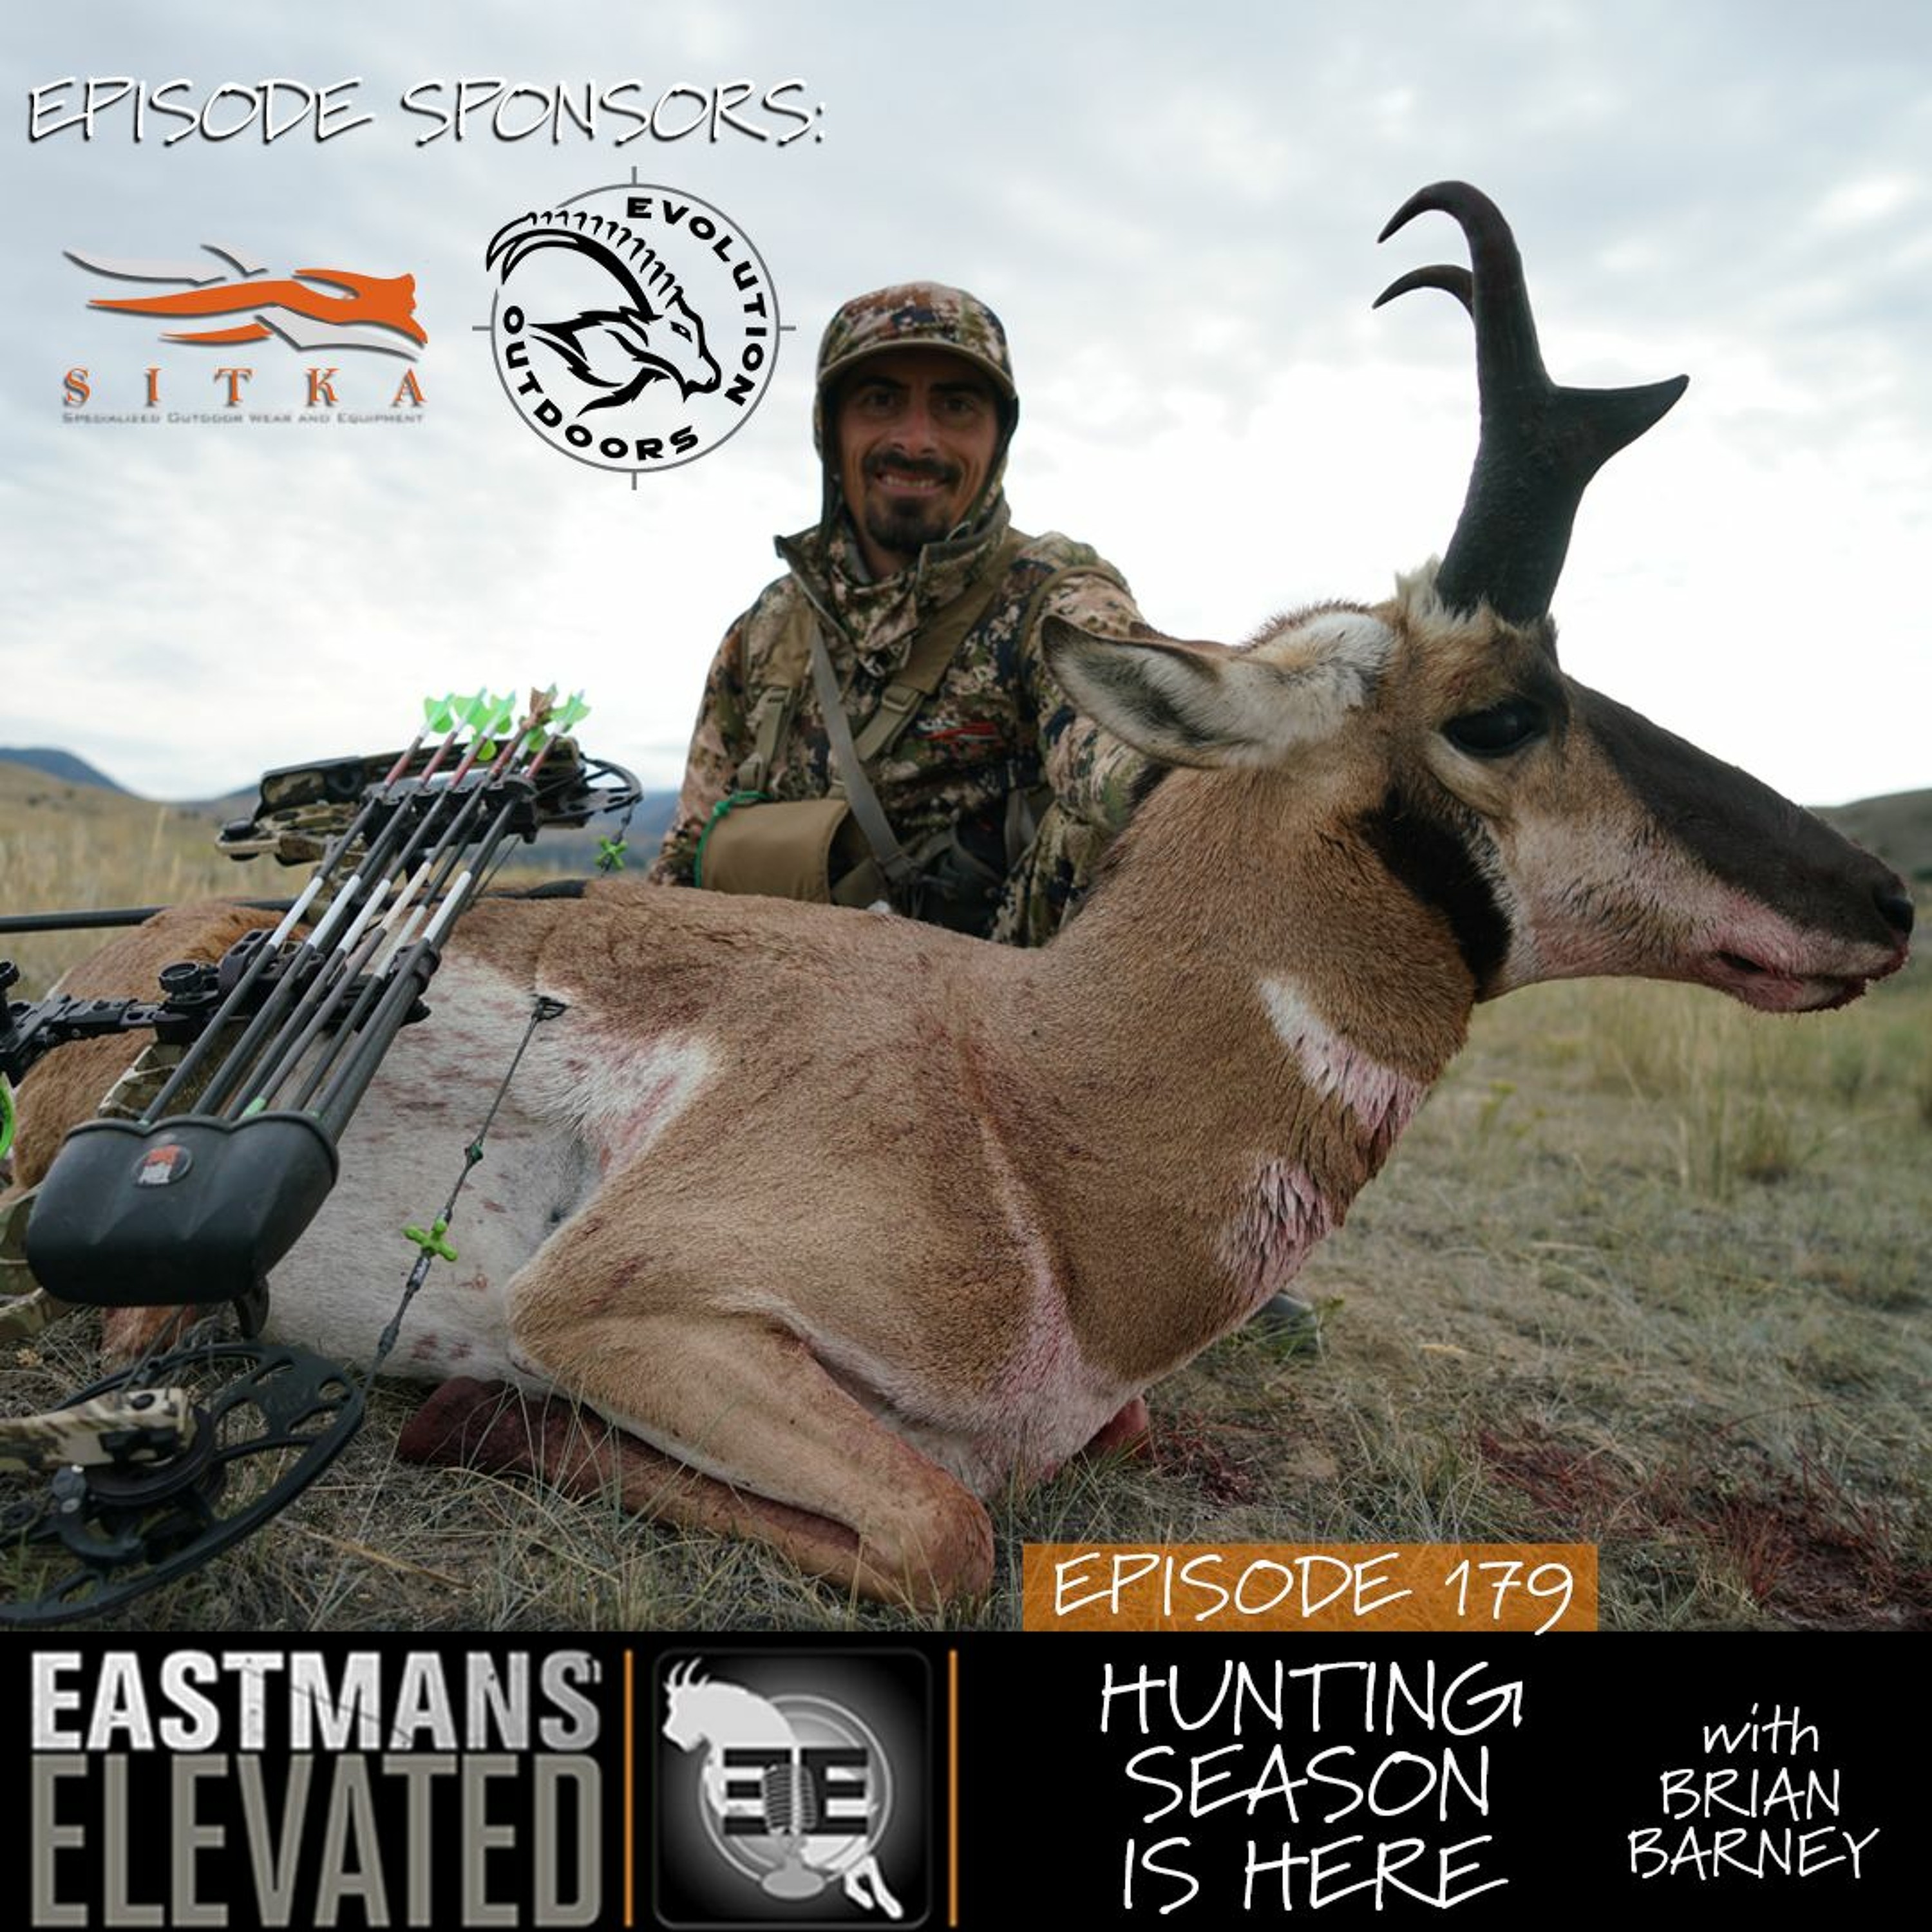 Episode 179: Hunting Season is Here with Brian Barney